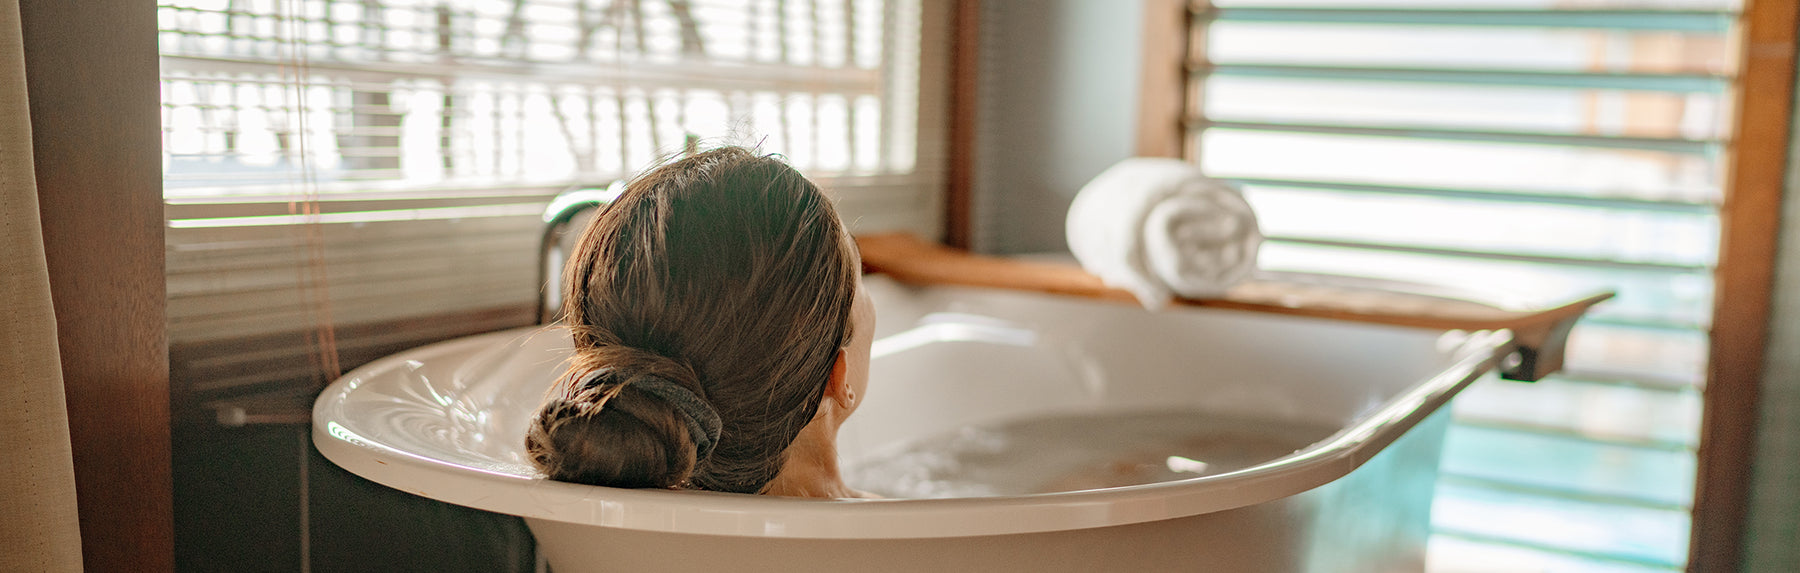 4 Ways to Prioritize Self-Care When You’re Always at Home